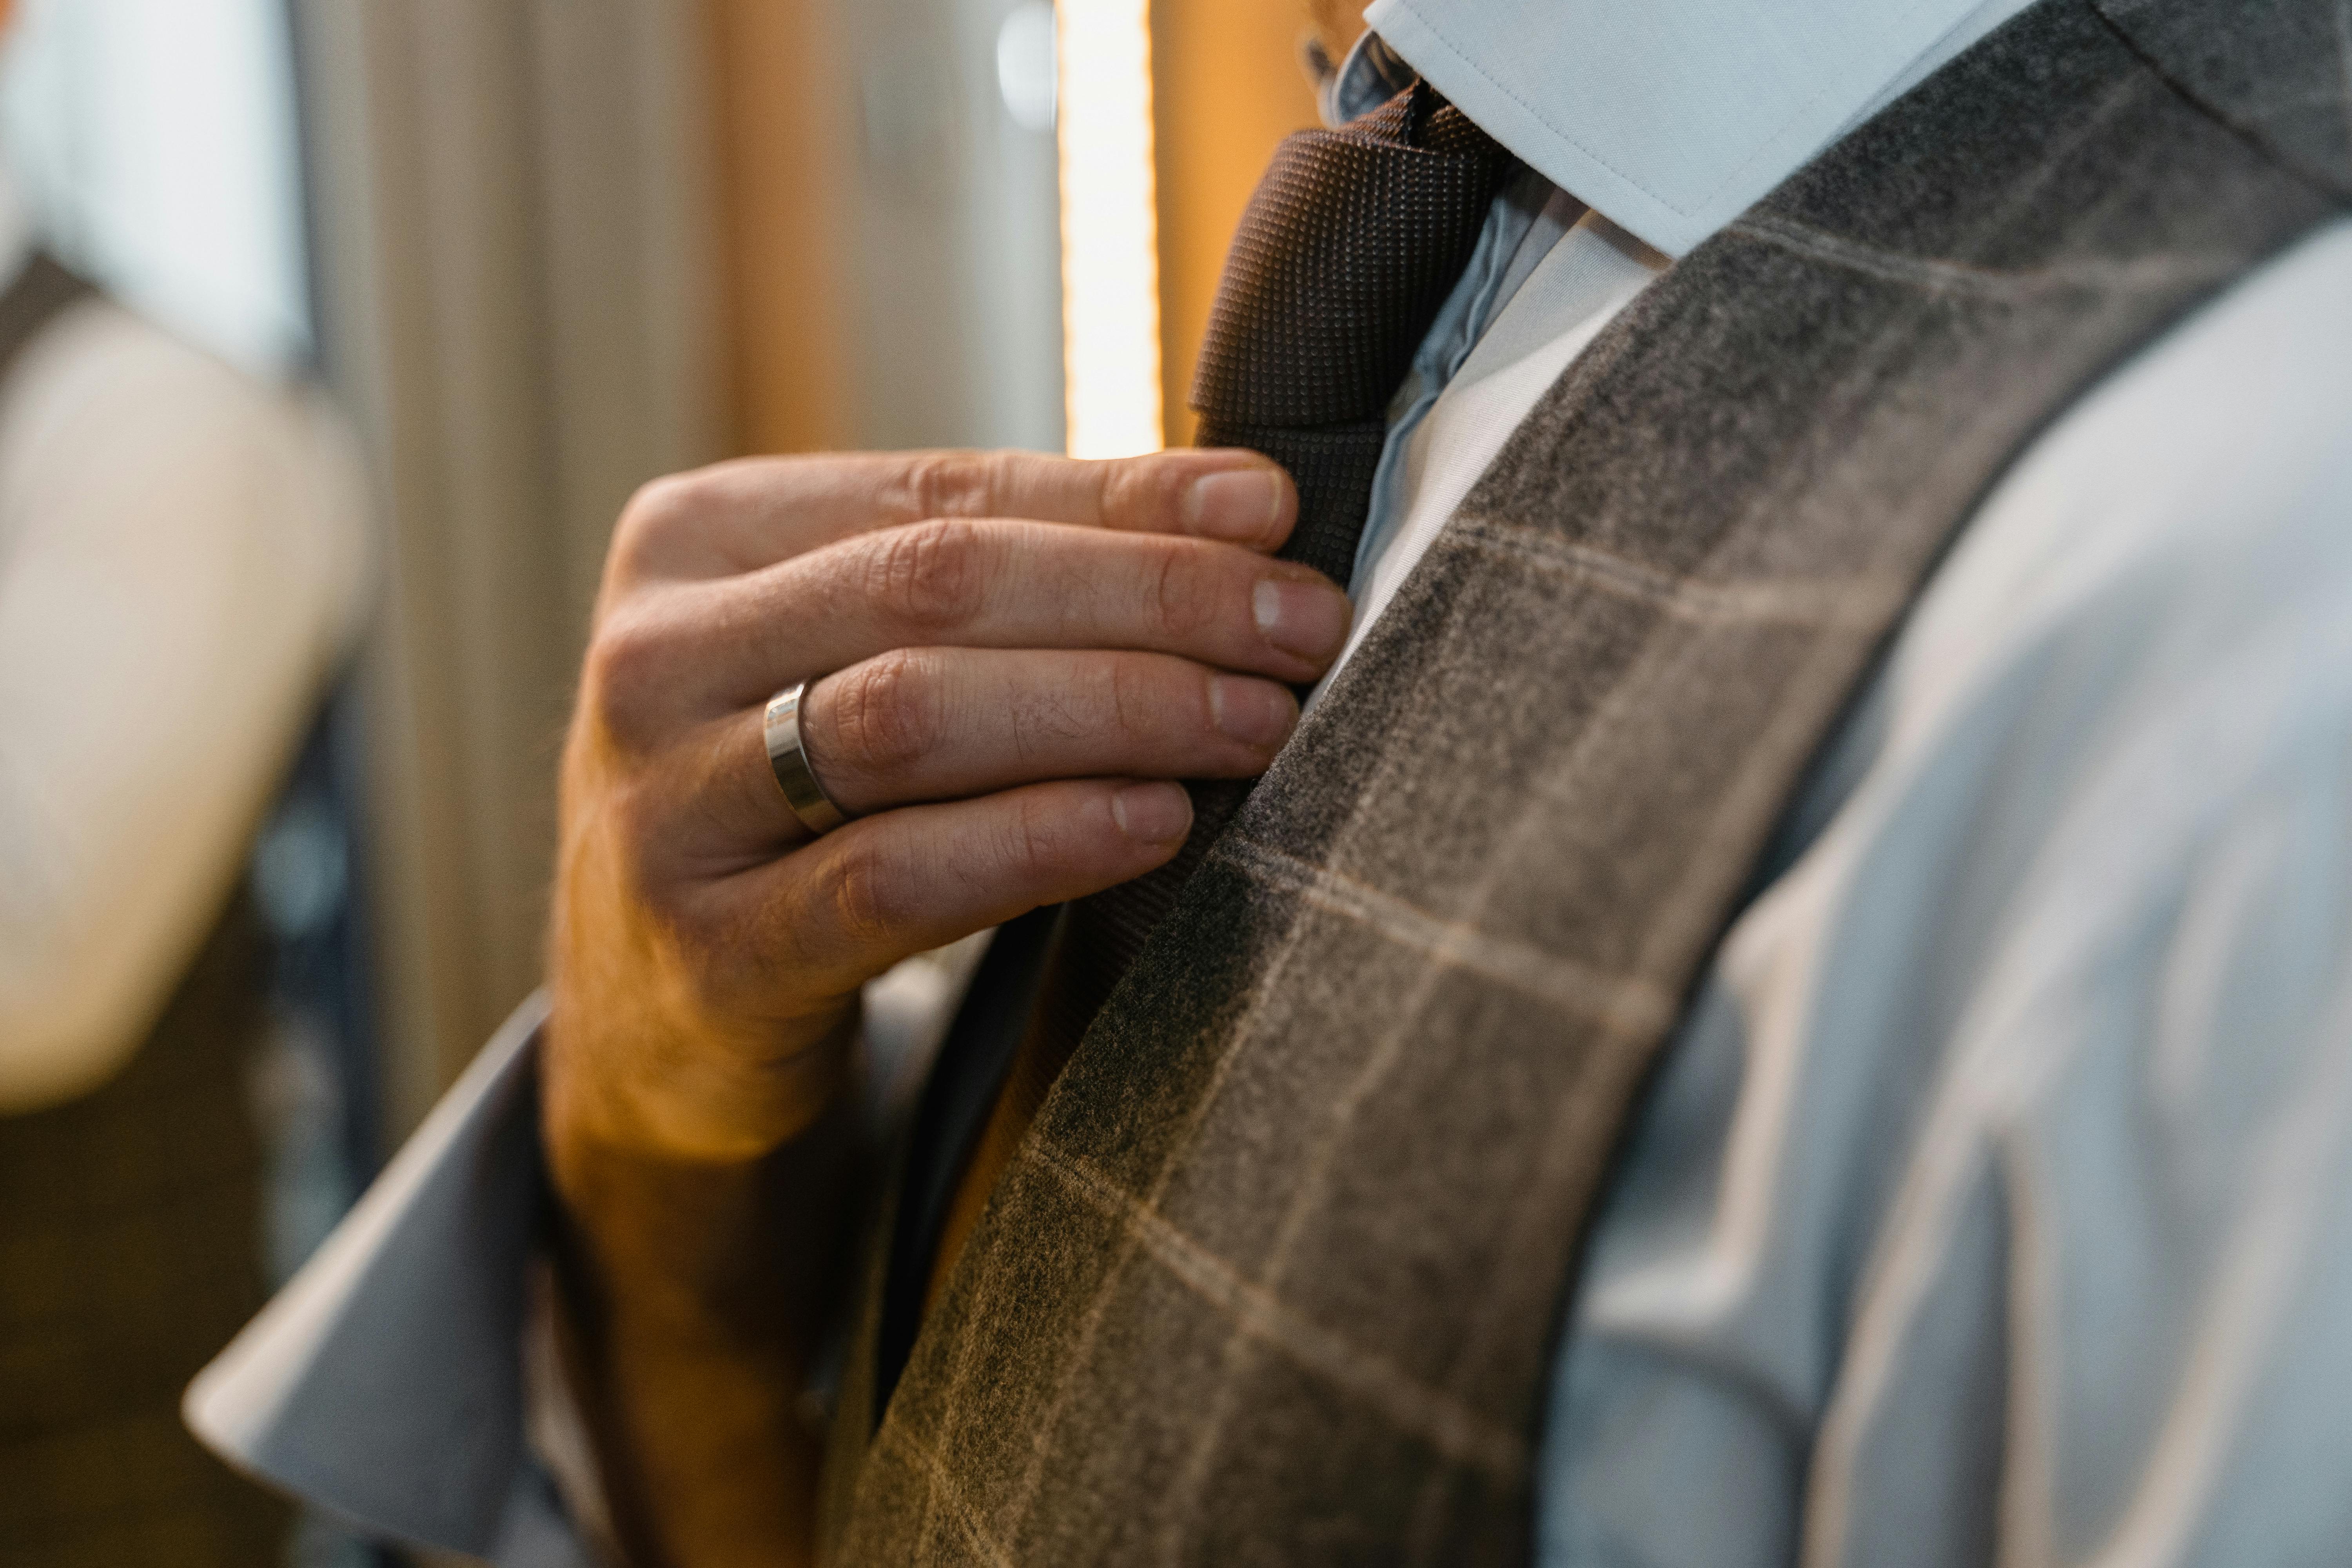 A man getting dressed in his finest suit and tie | Source: Pexels